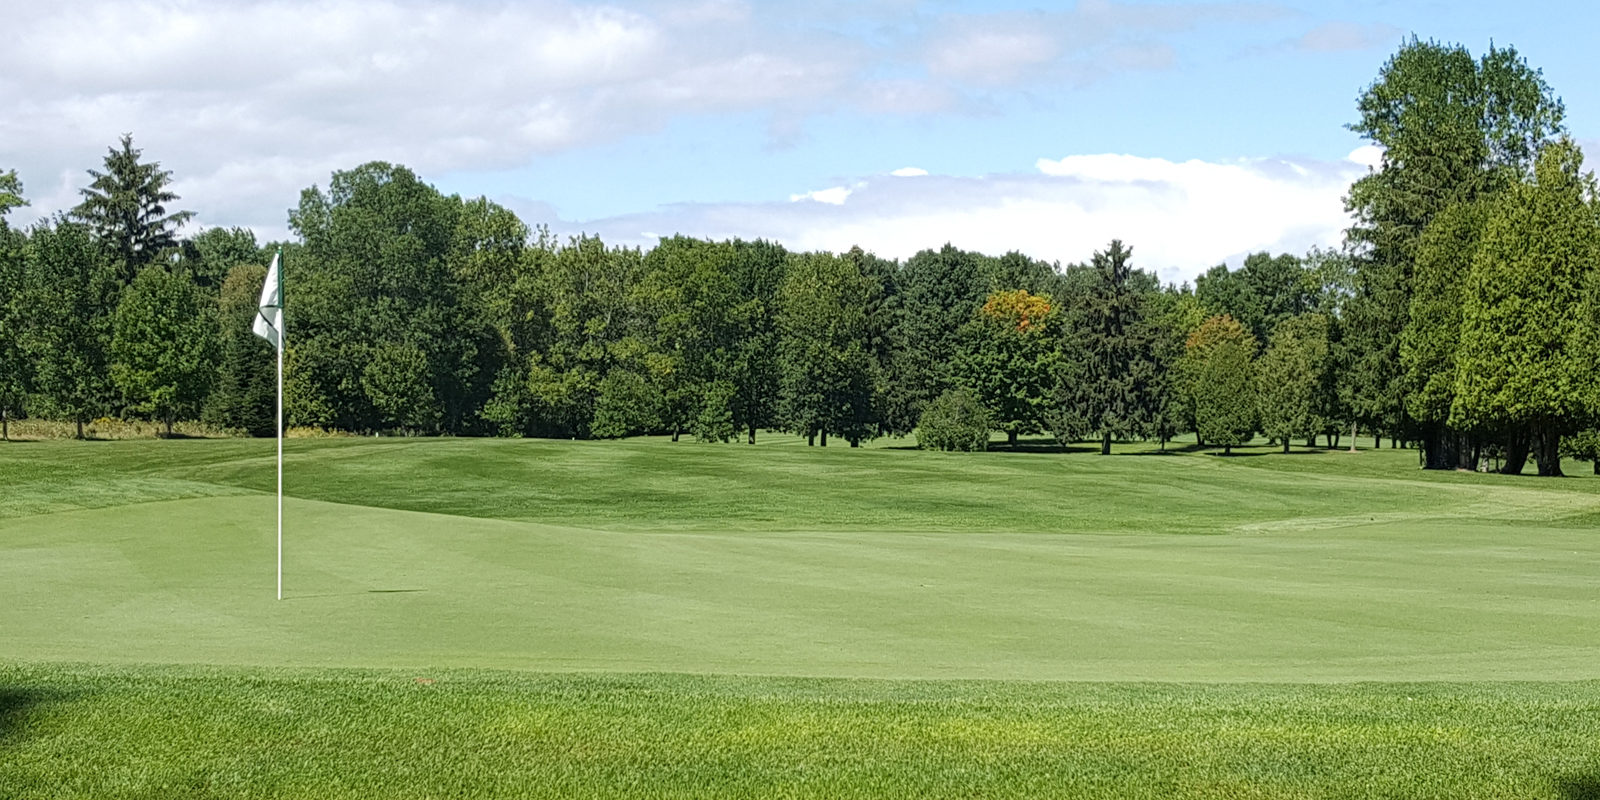 Riverdale Country Club